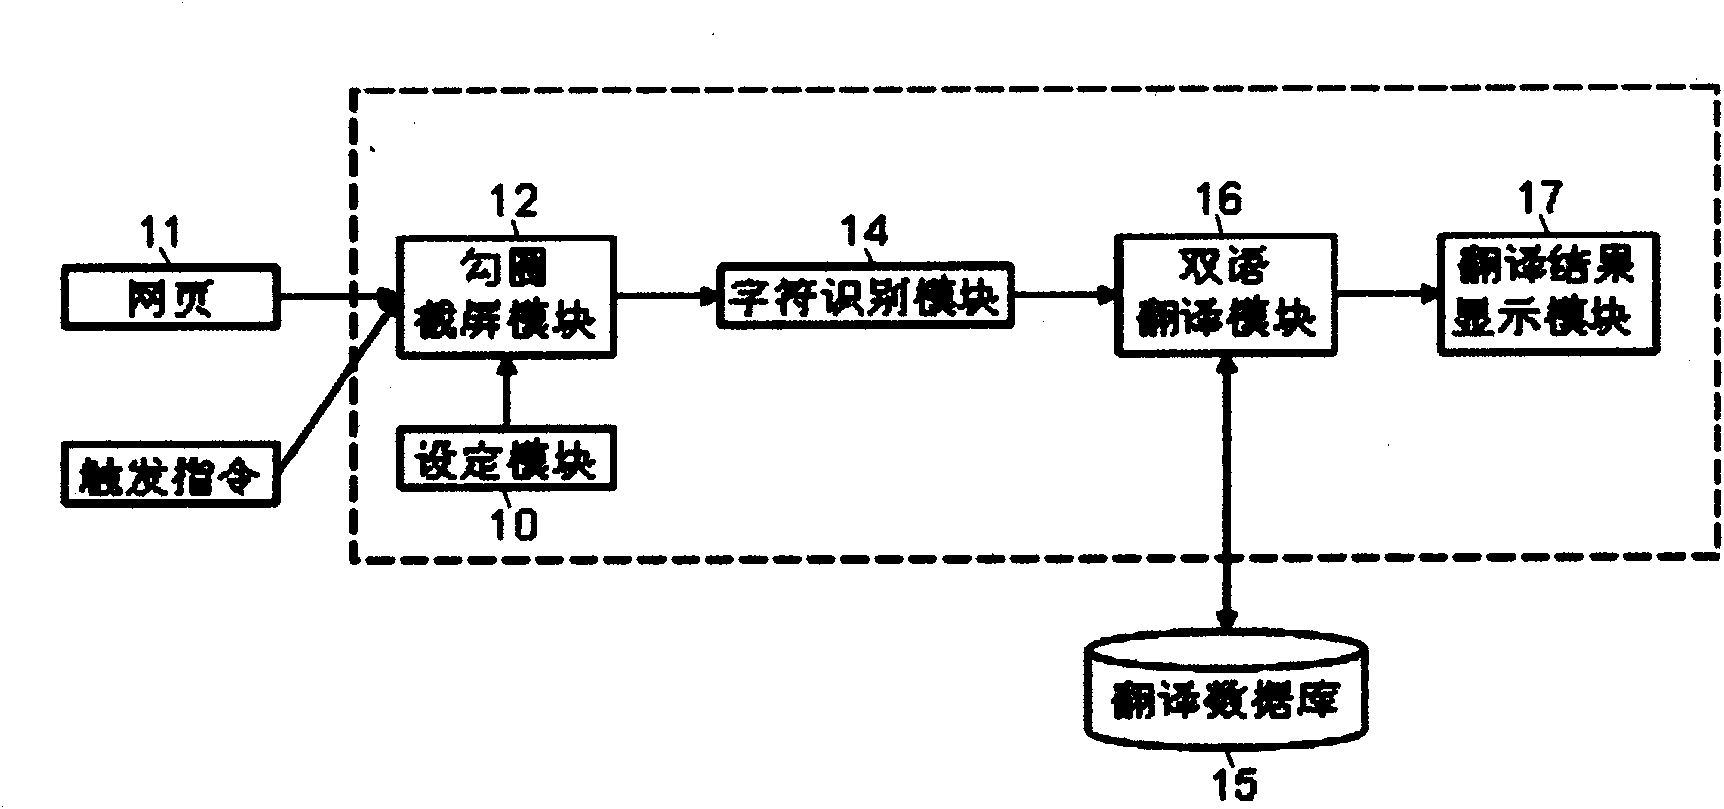 System and method for instantly translating web pages hooked by users